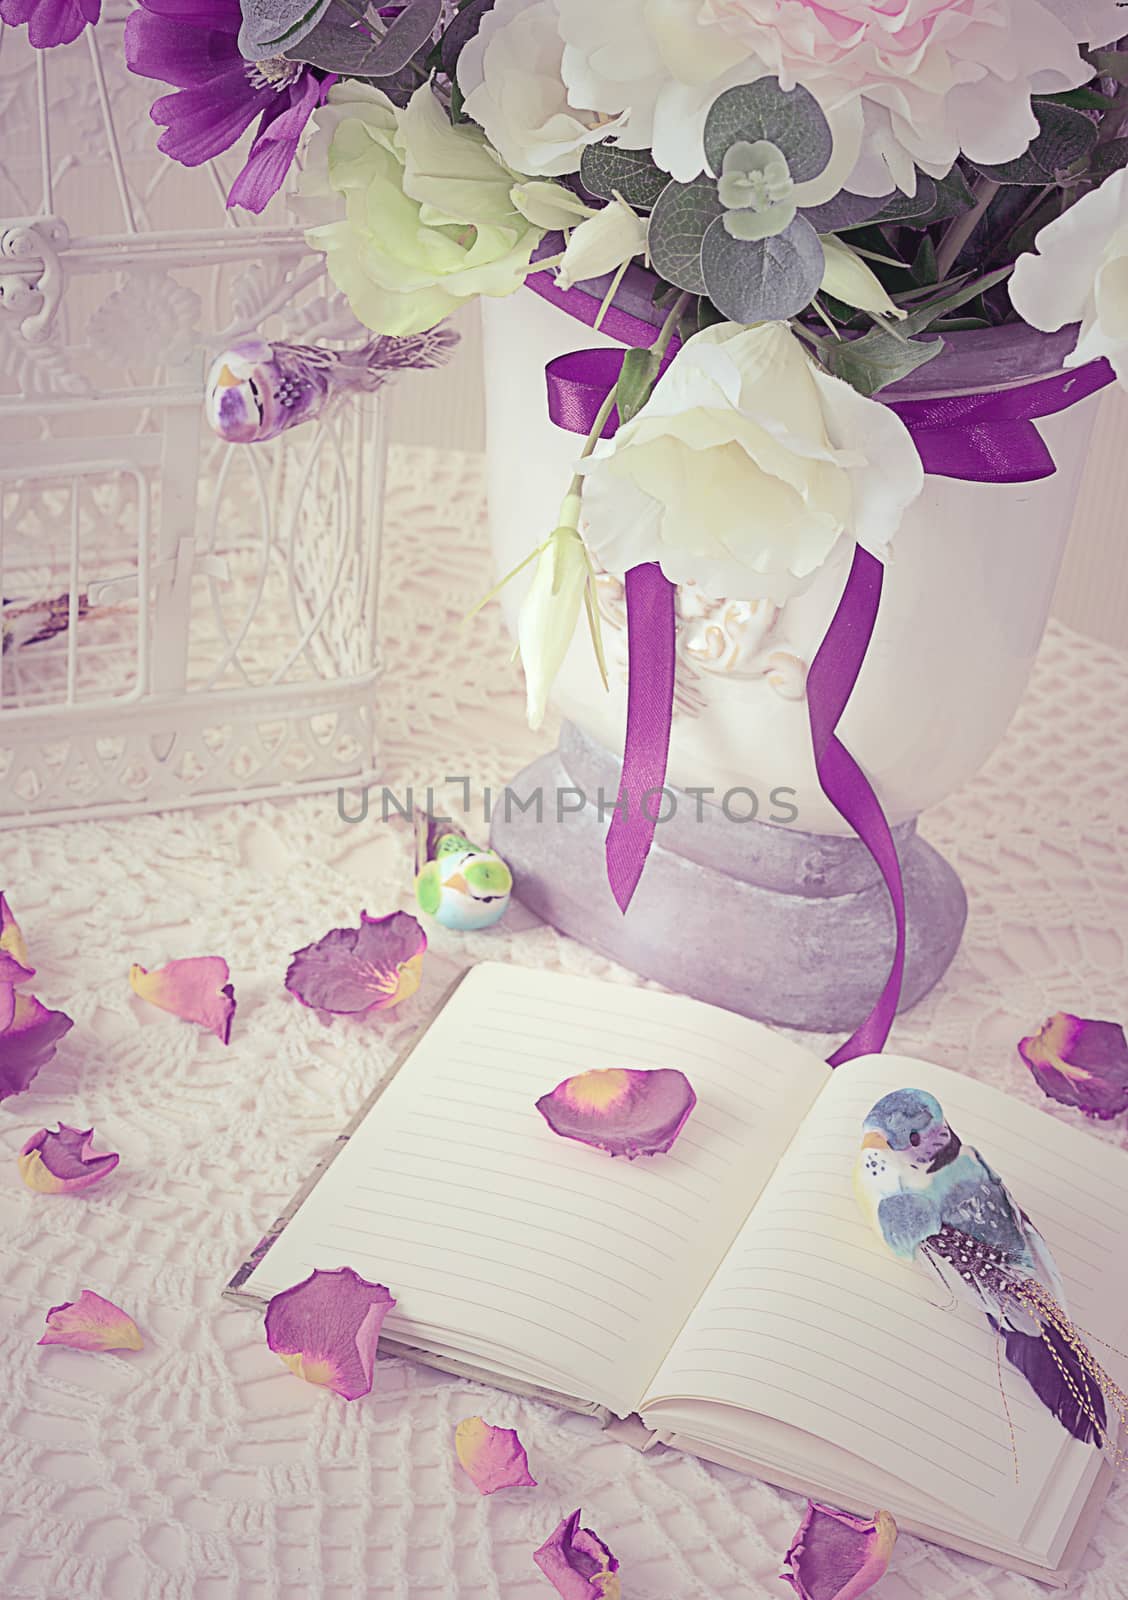 The book on a table with rose petals by SvetaVo